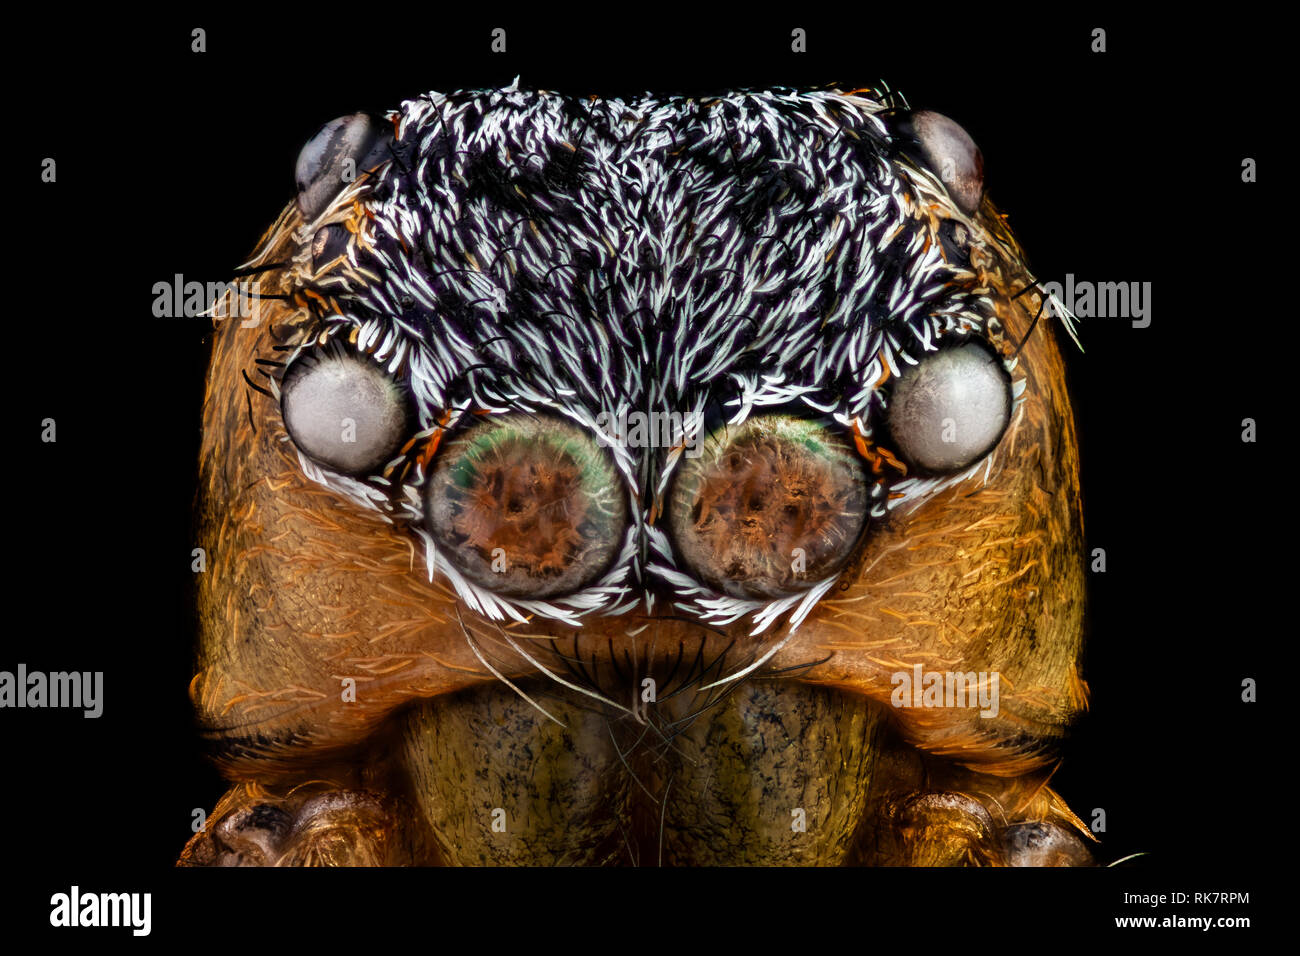 Portrait of a jumping spider magnified 10 times Stock Photo